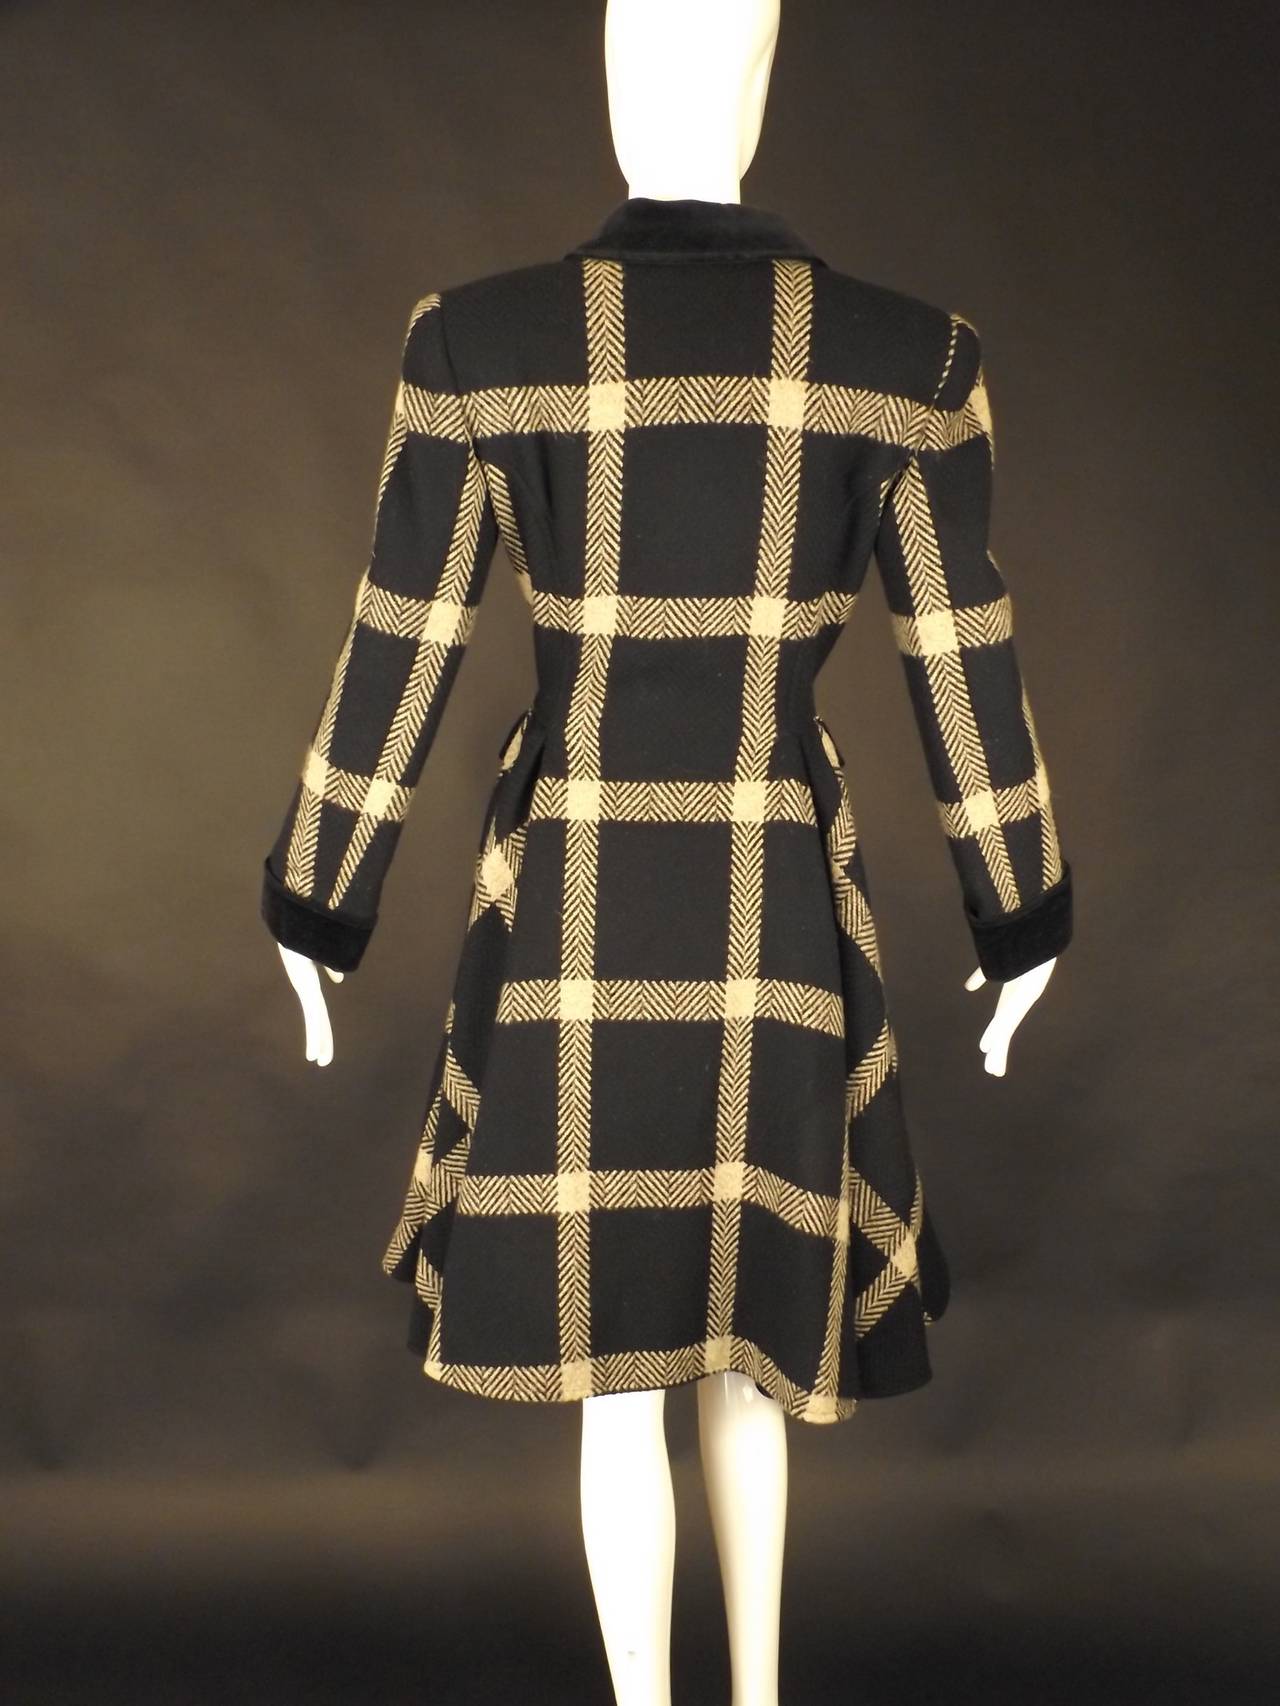 Fabulous swing coat in a black and gray chevron & windowpane wool.  The coat has a small velveteen collar in black and wide, spread lapels. Double breasted button closures down the front. The coat is princess seamed with gathered sections around the